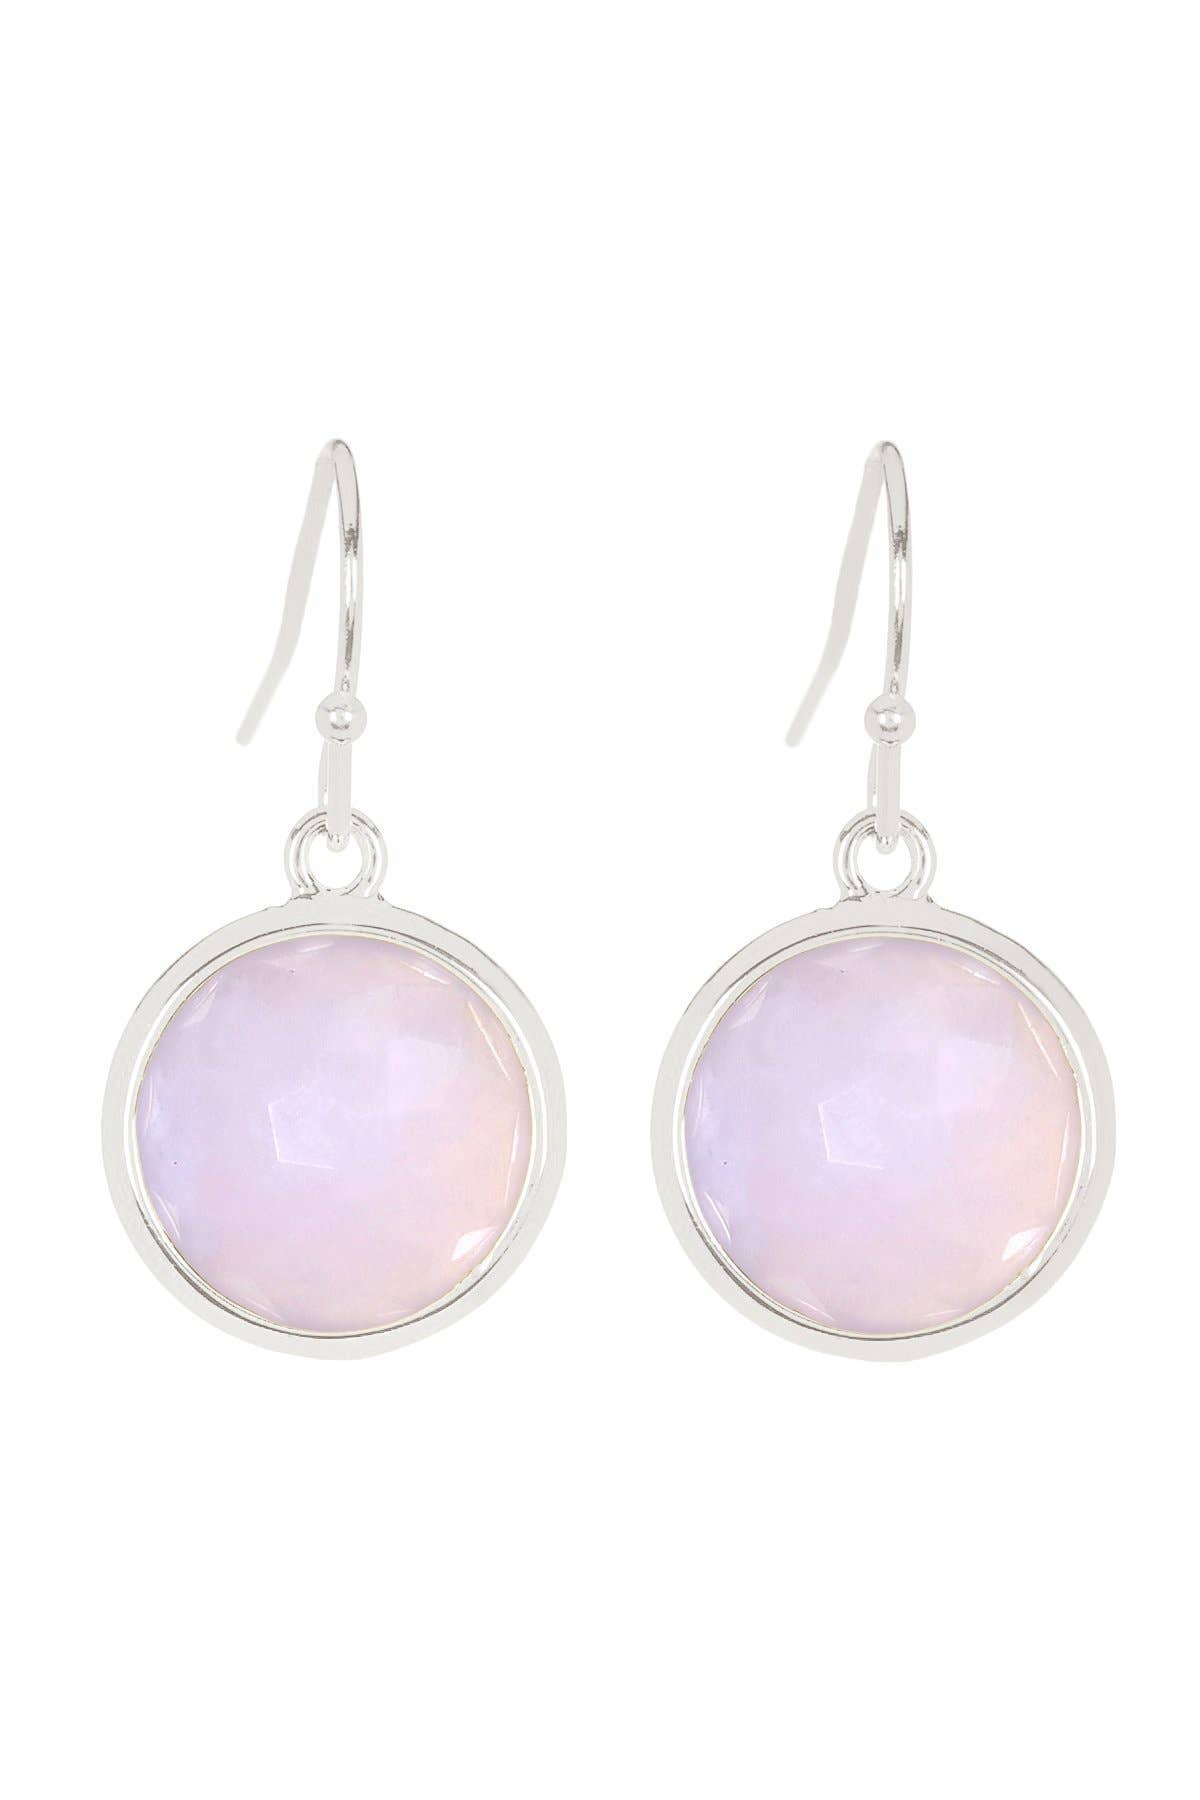 Sterling Silver & Blue Lace Agate Round Earrings - SS